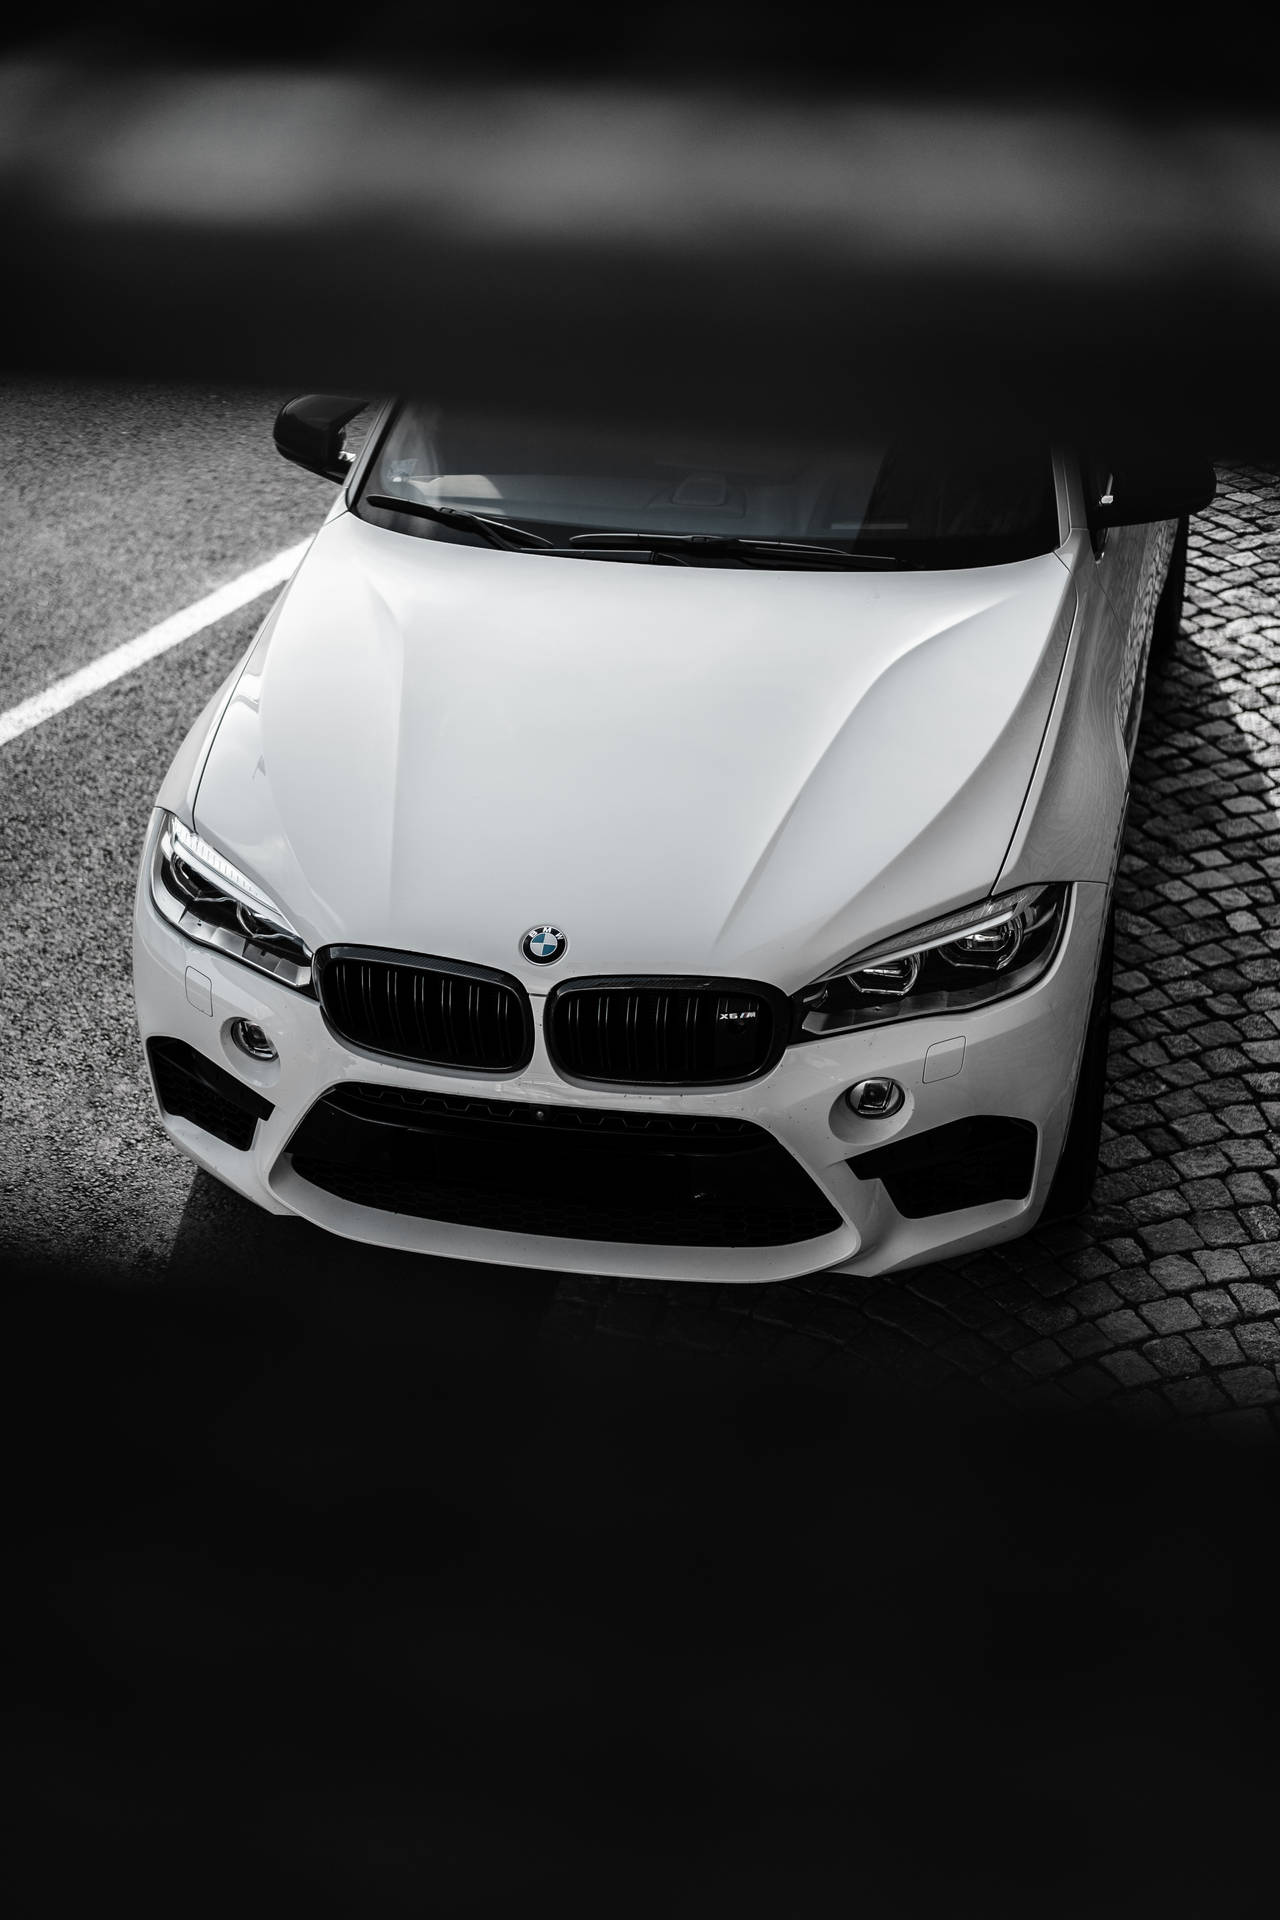 Caption: Exemplary Design And Unmatched Performance - Bmw M3 In Black And White Background